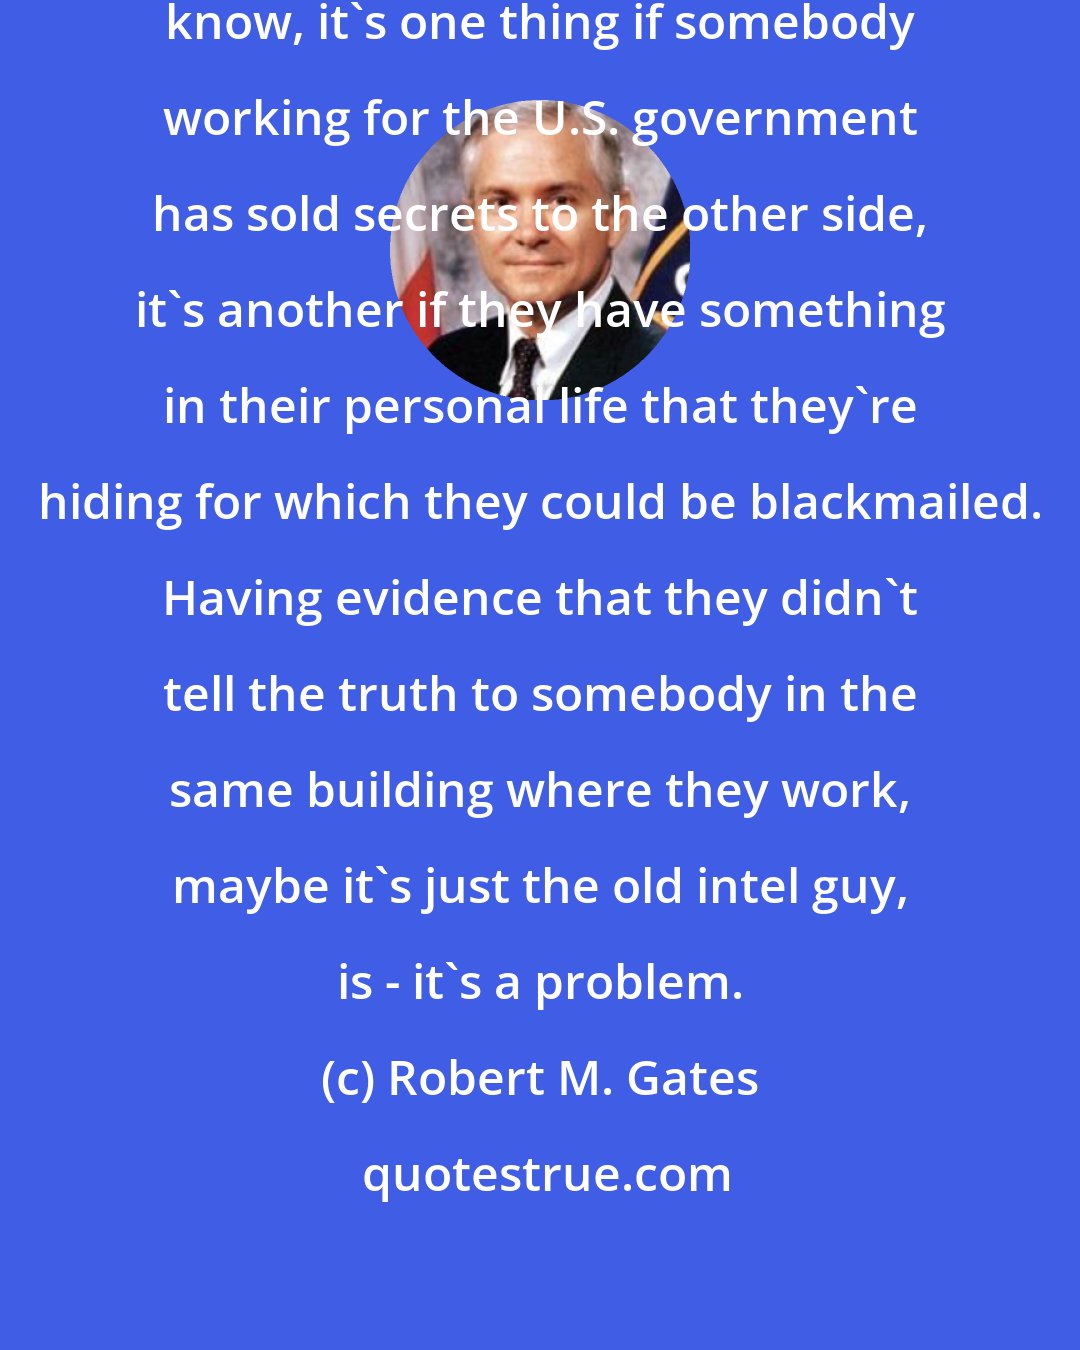 Robert M. Gates: I think it's kind of a stretch. You know, it's one thing if somebody working for the U.S. government has sold secrets to the other side, it's another if they have something in their personal life that they're hiding for which they could be blackmailed. Having evidence that they didn't tell the truth to somebody in the same building where they work, maybe it's just the old intel guy, is - it's a problem.